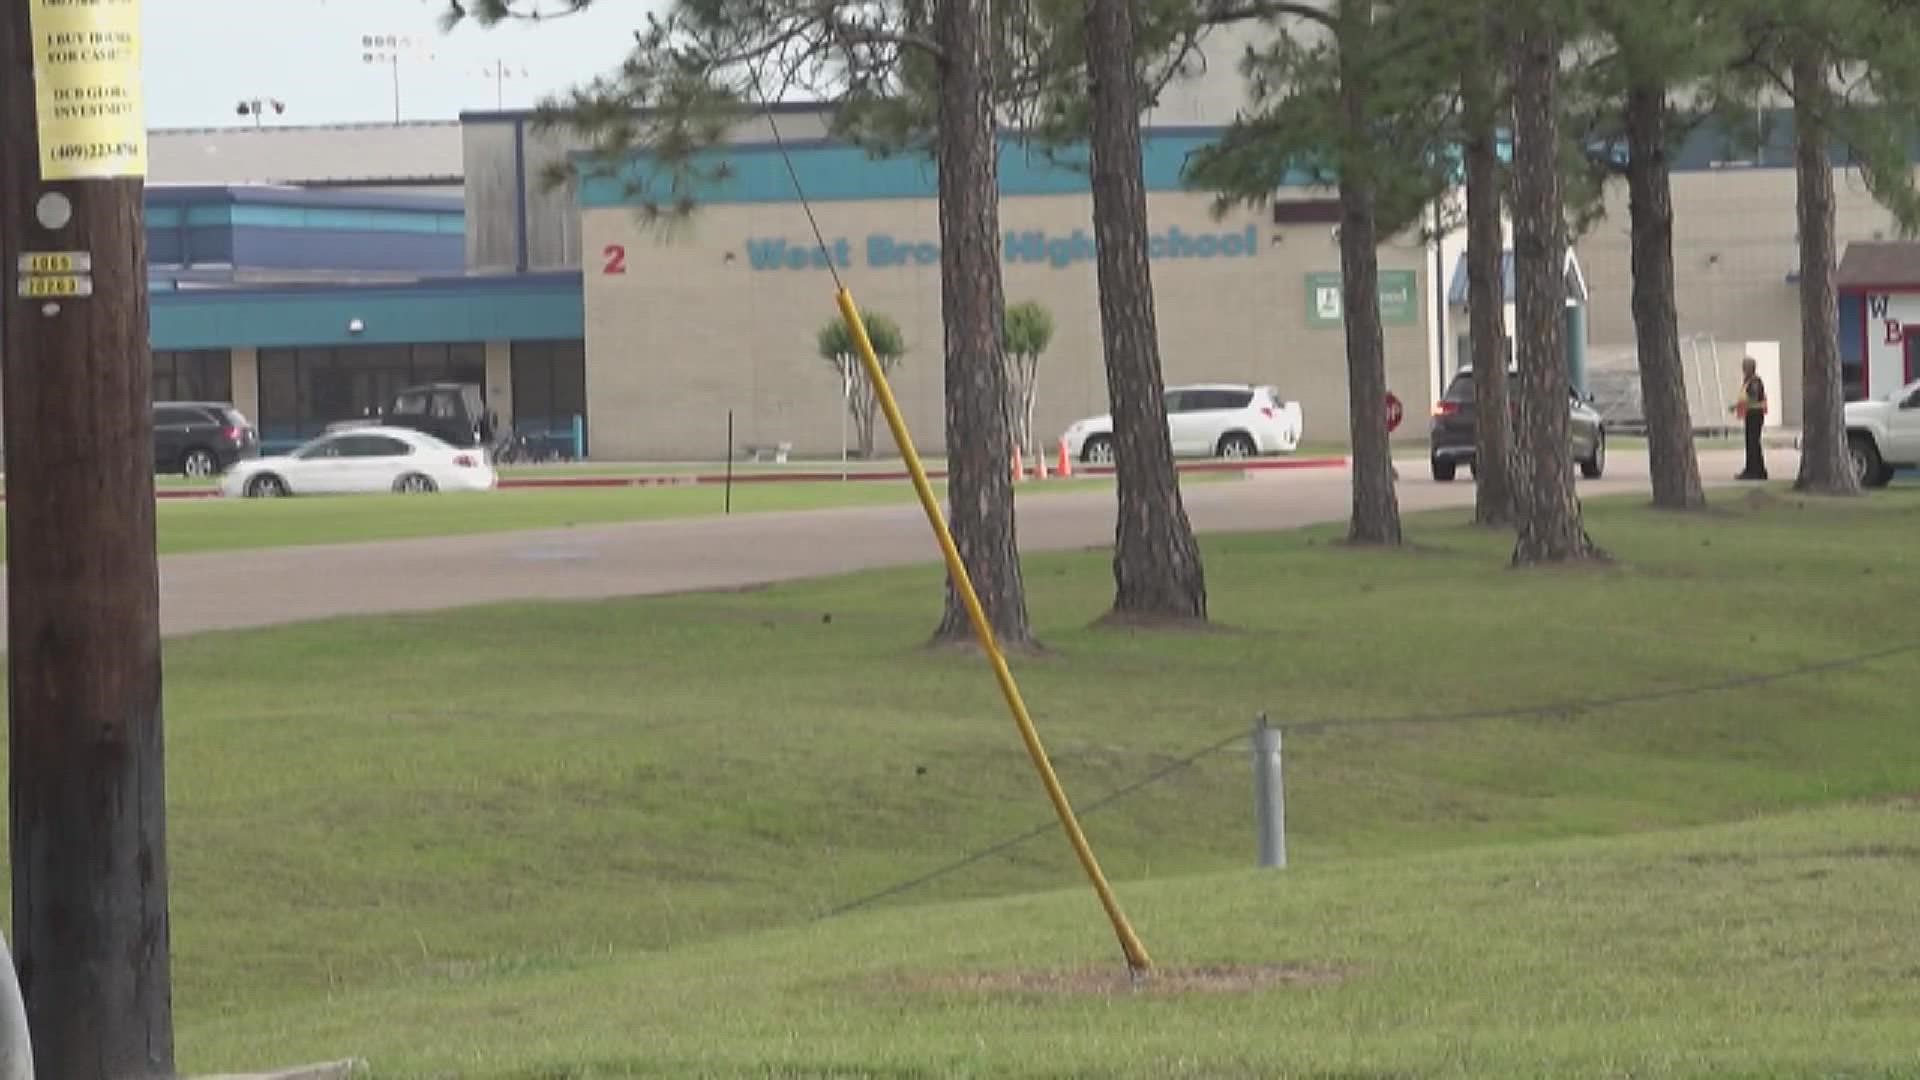 A Beaumont city councilman is calling for state and national-level change after what he describes as a "horrific incident" at West Brook High School.